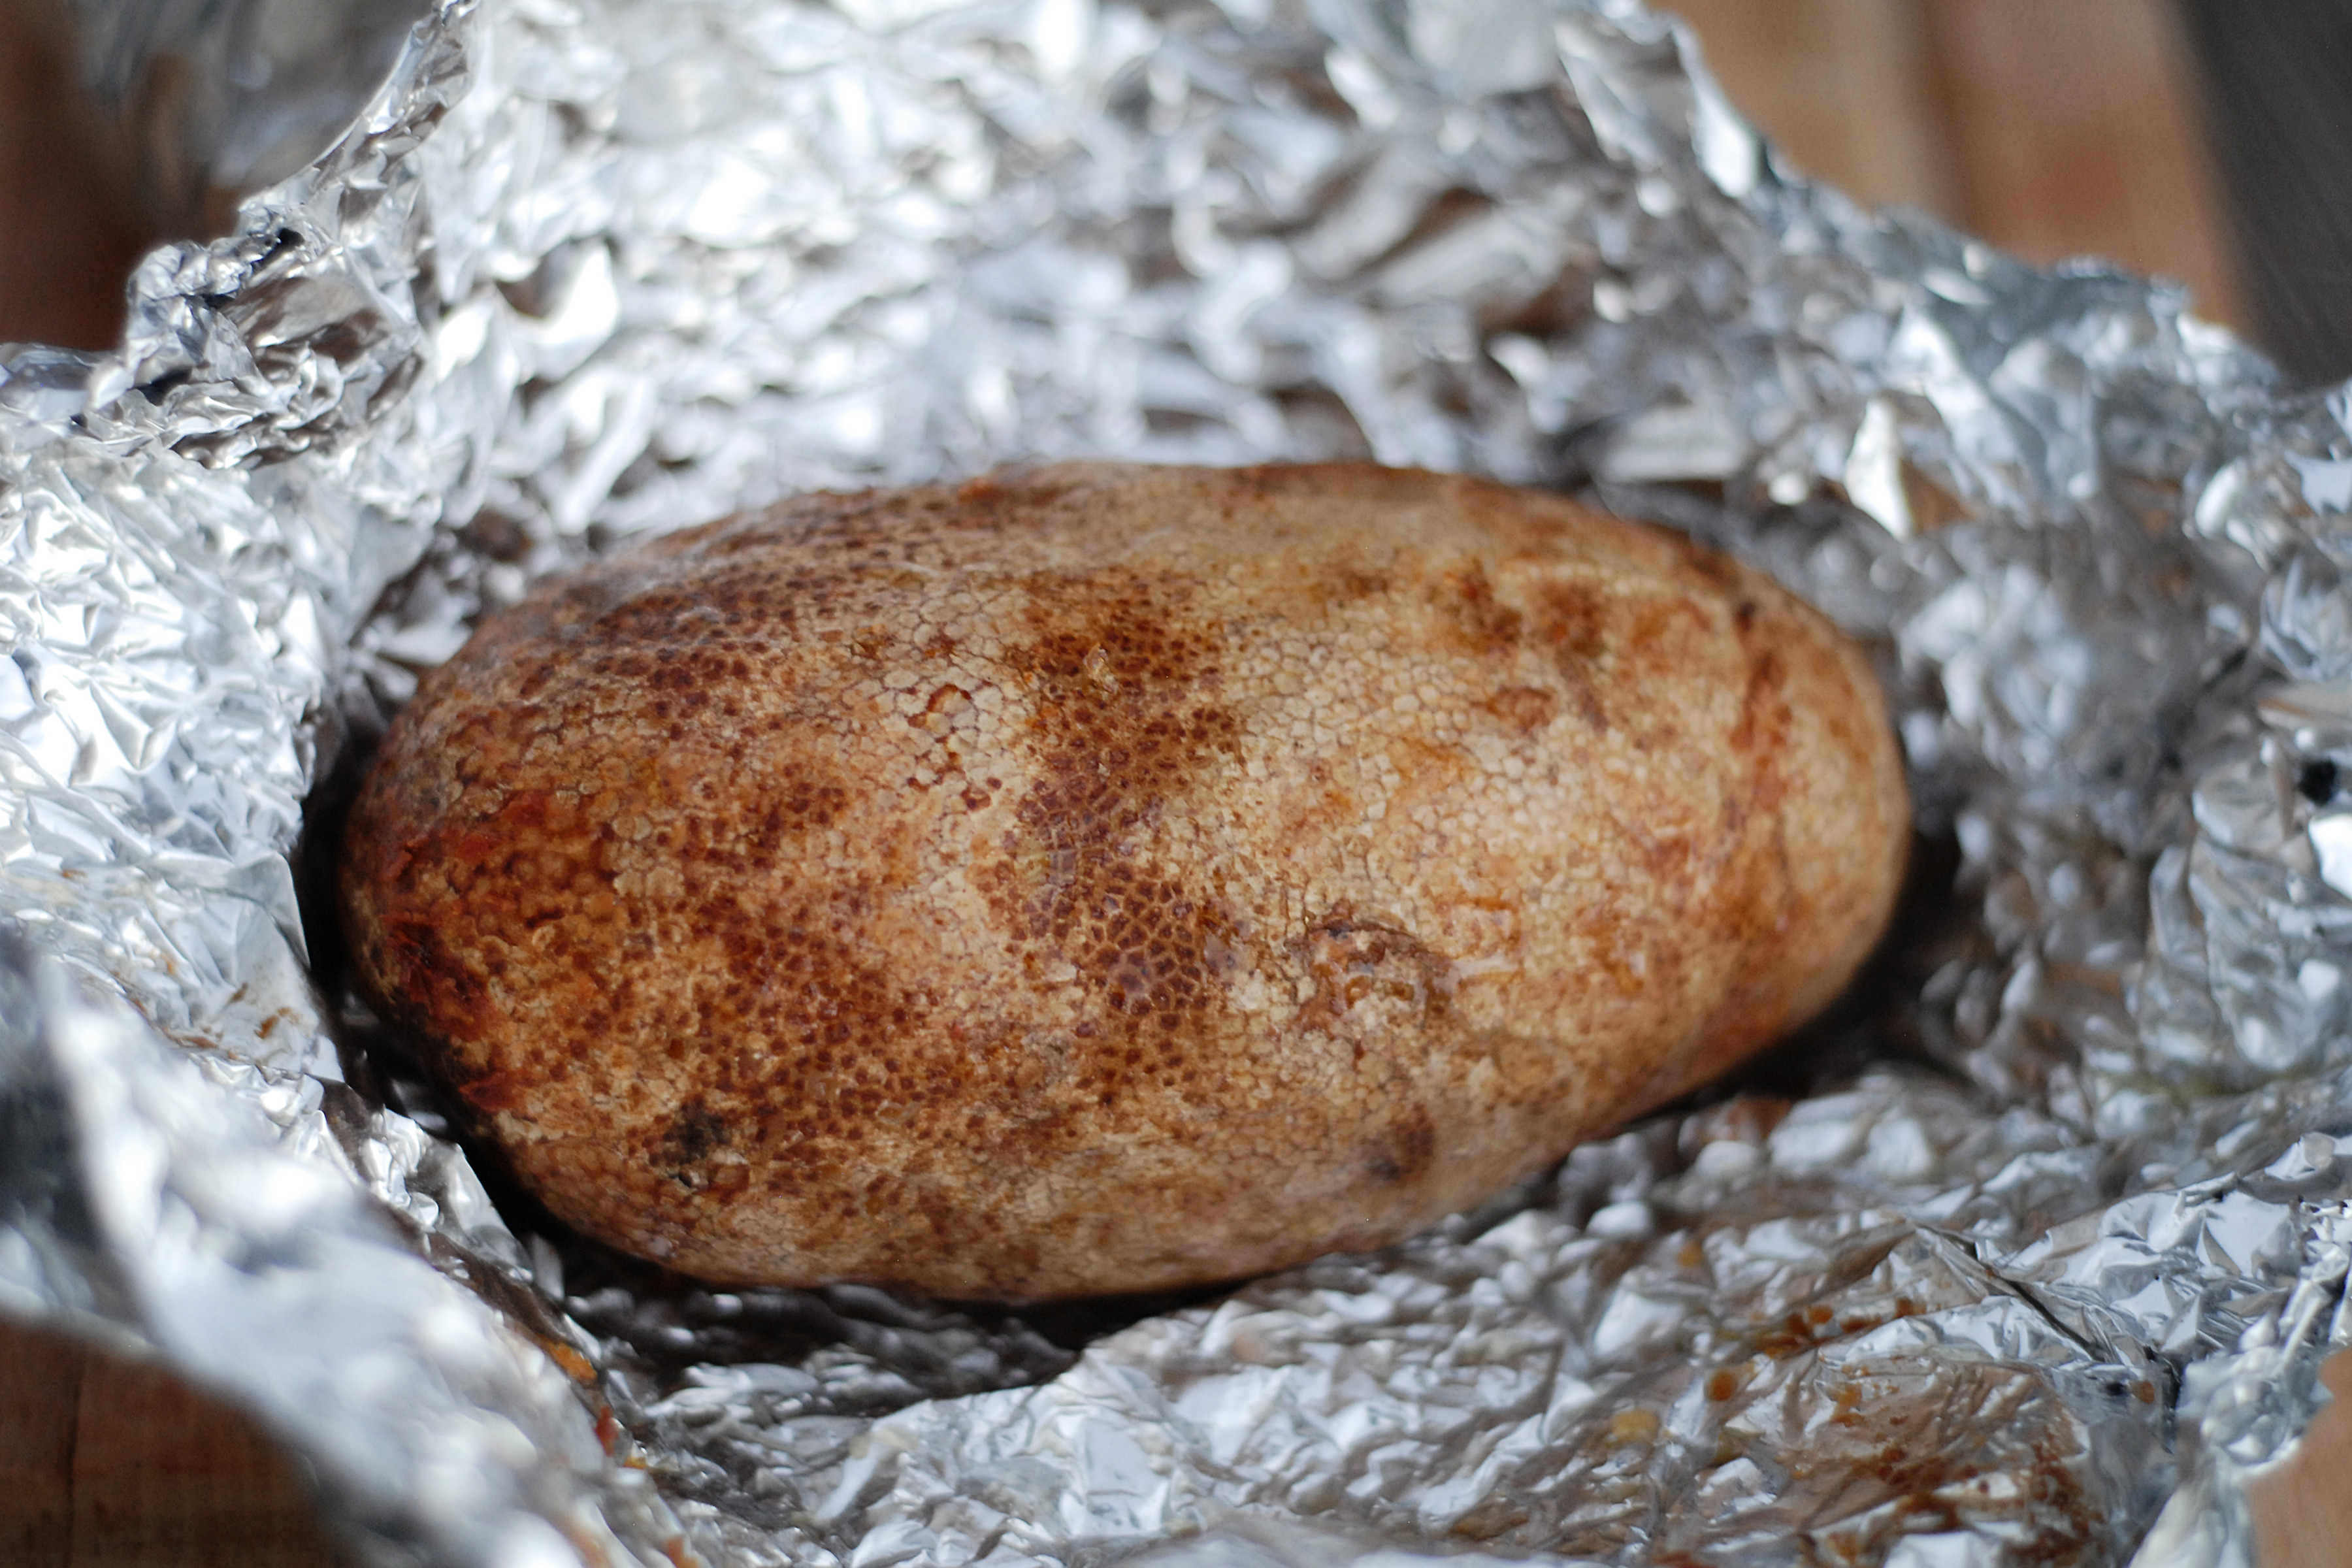 Baked Potato In Oven Wrapped In Foil
 baked potato foil oven temp